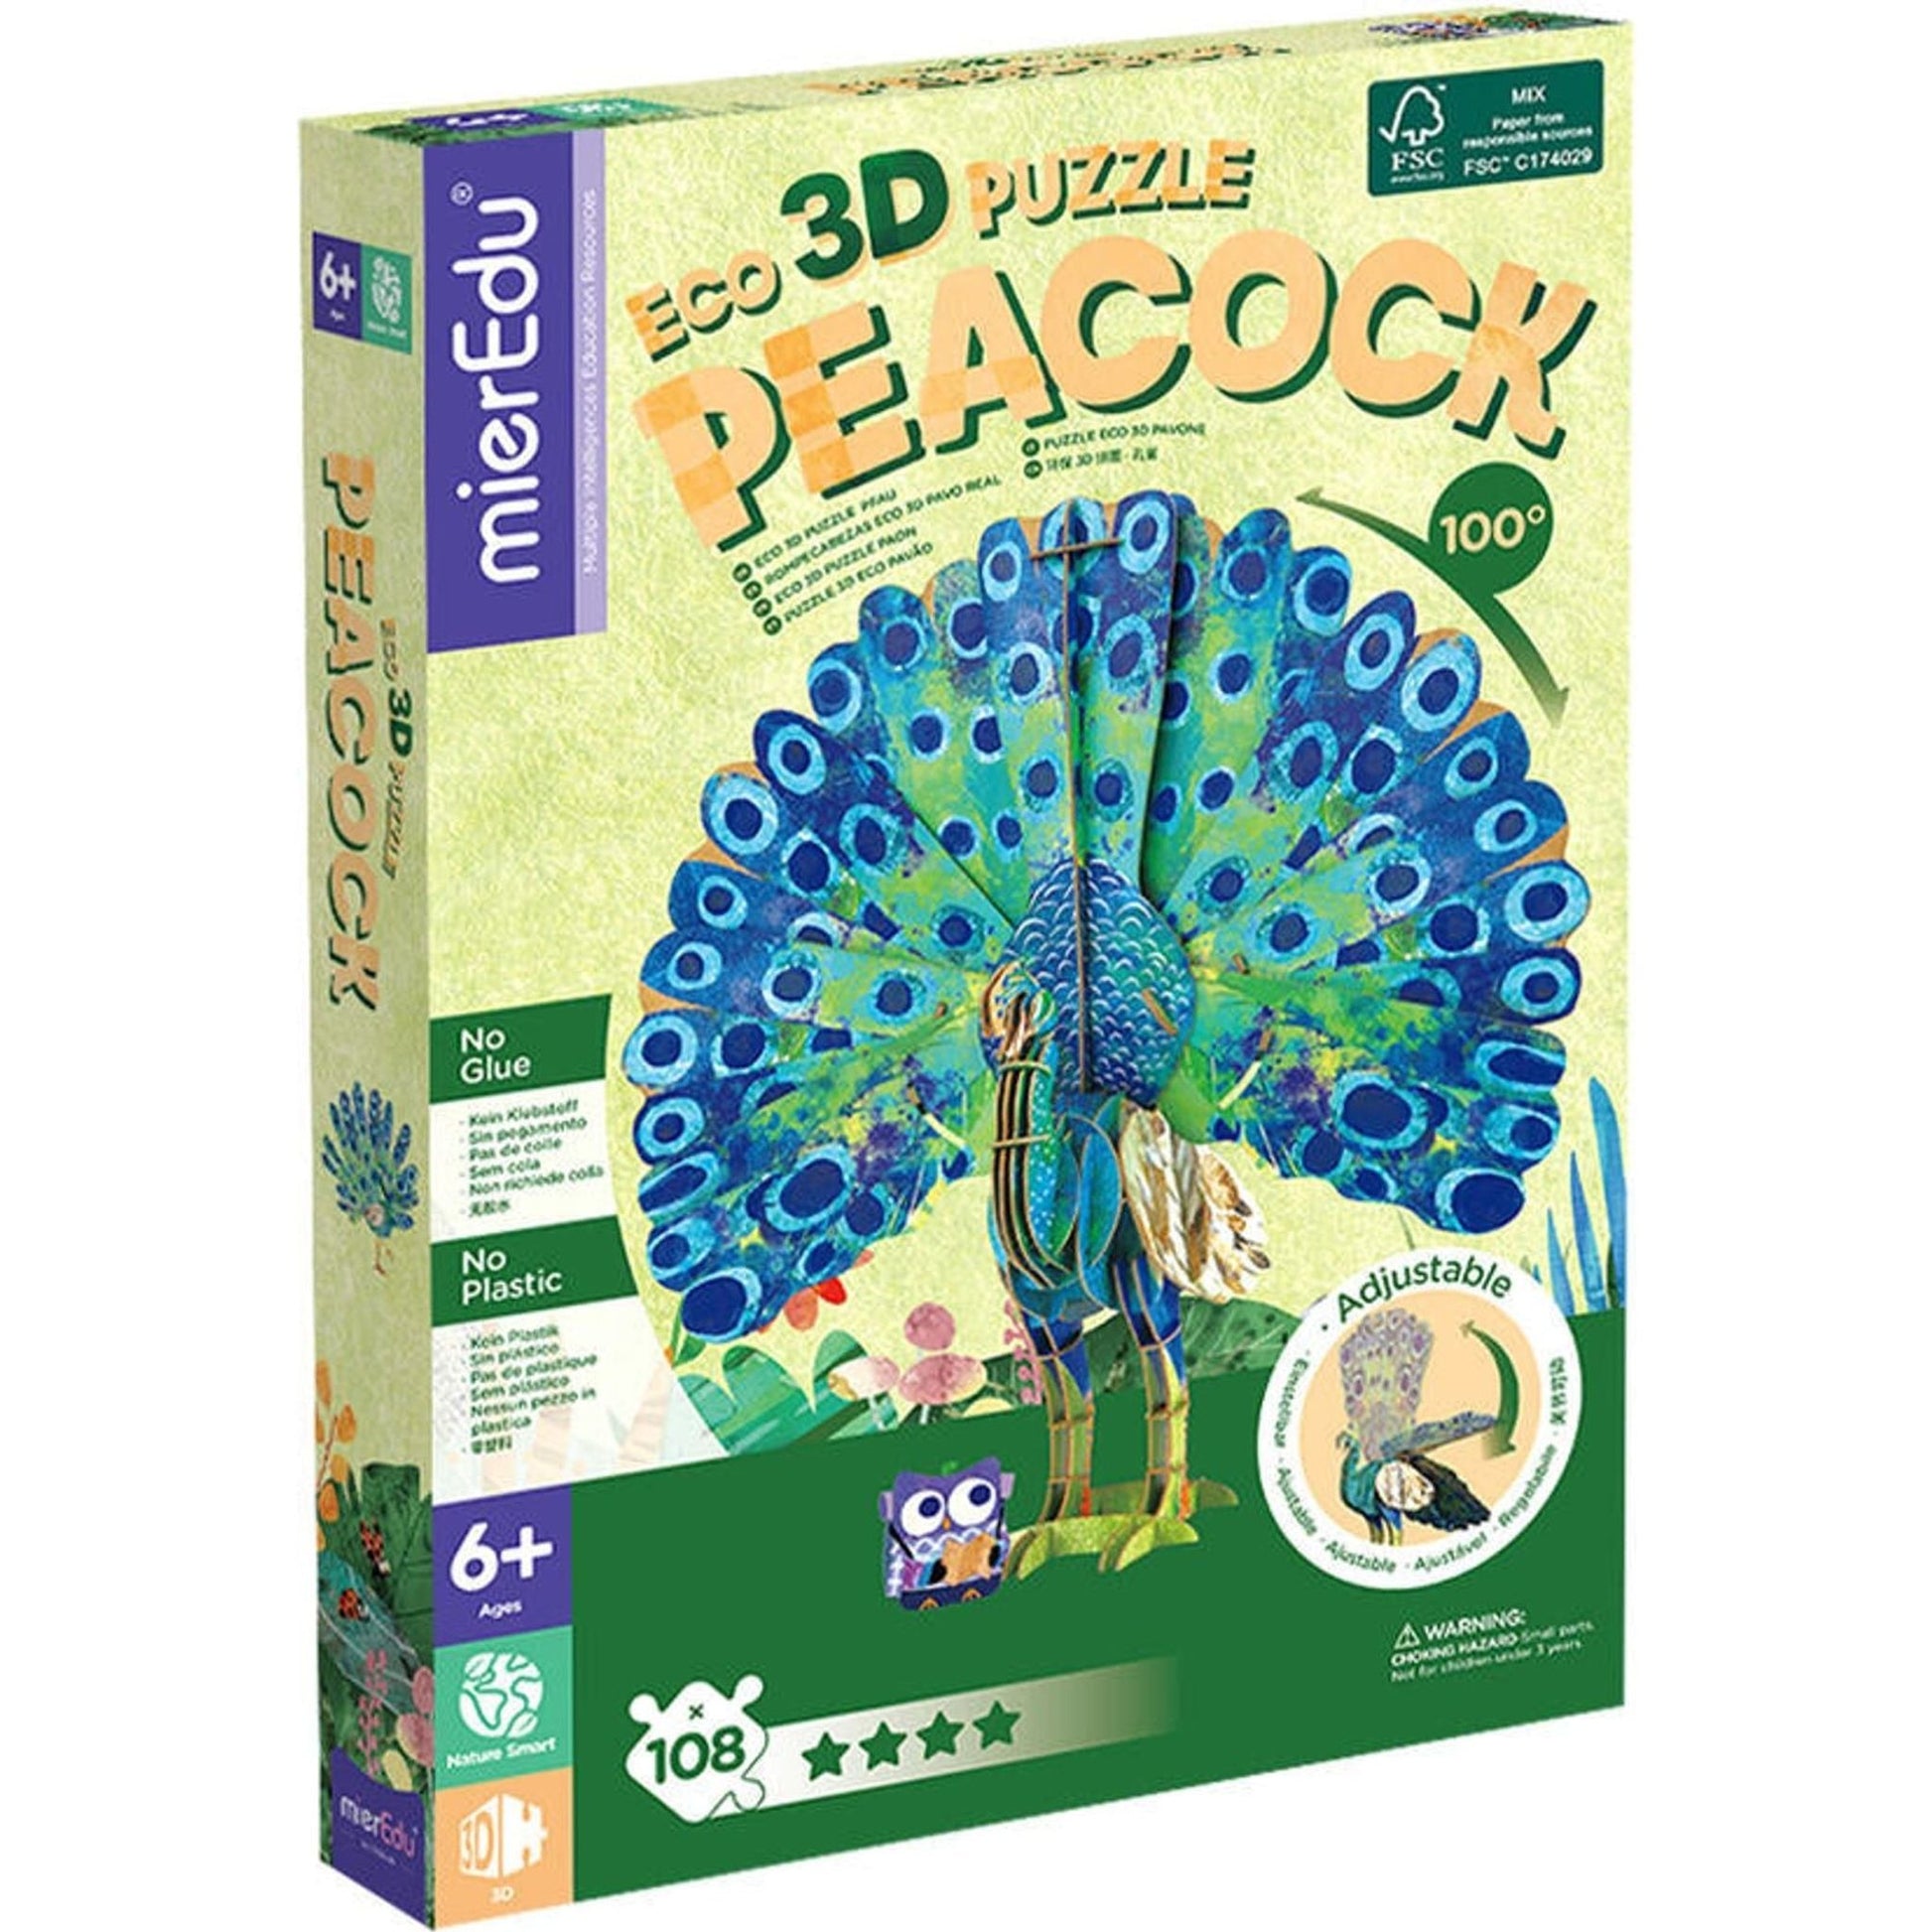 mierEdu Eco 3D Puzzle - Peacock - Toybox Tales